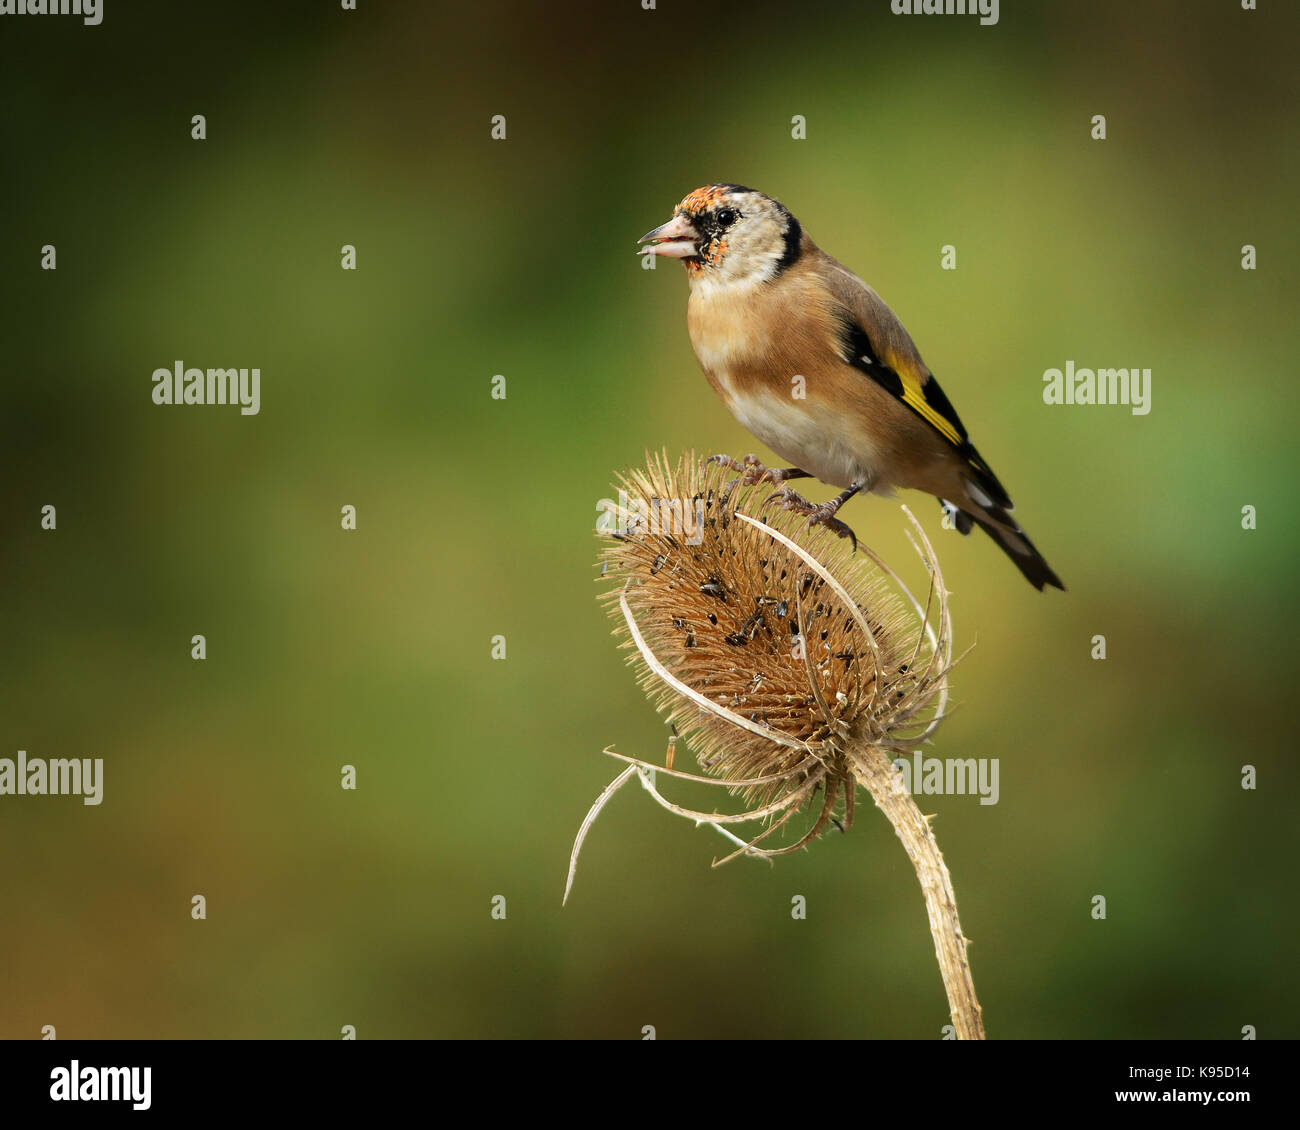 European goldfinch common garden bird pictured in a natural dappled sunlight light in England UK on classic teasel head Stock Photo